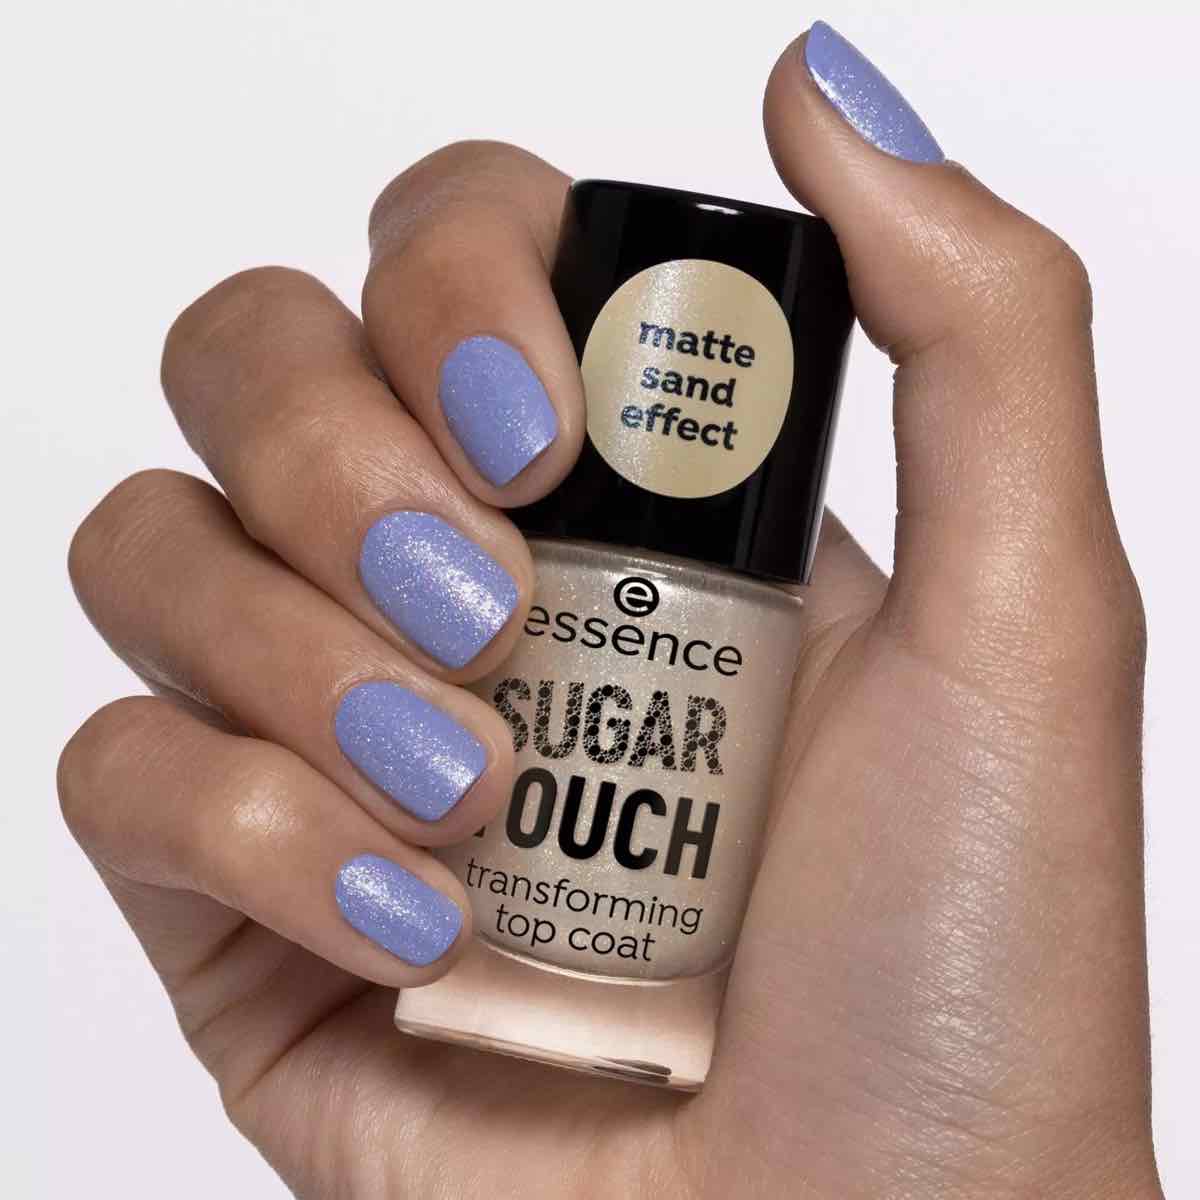 Essence sugar touch top coat